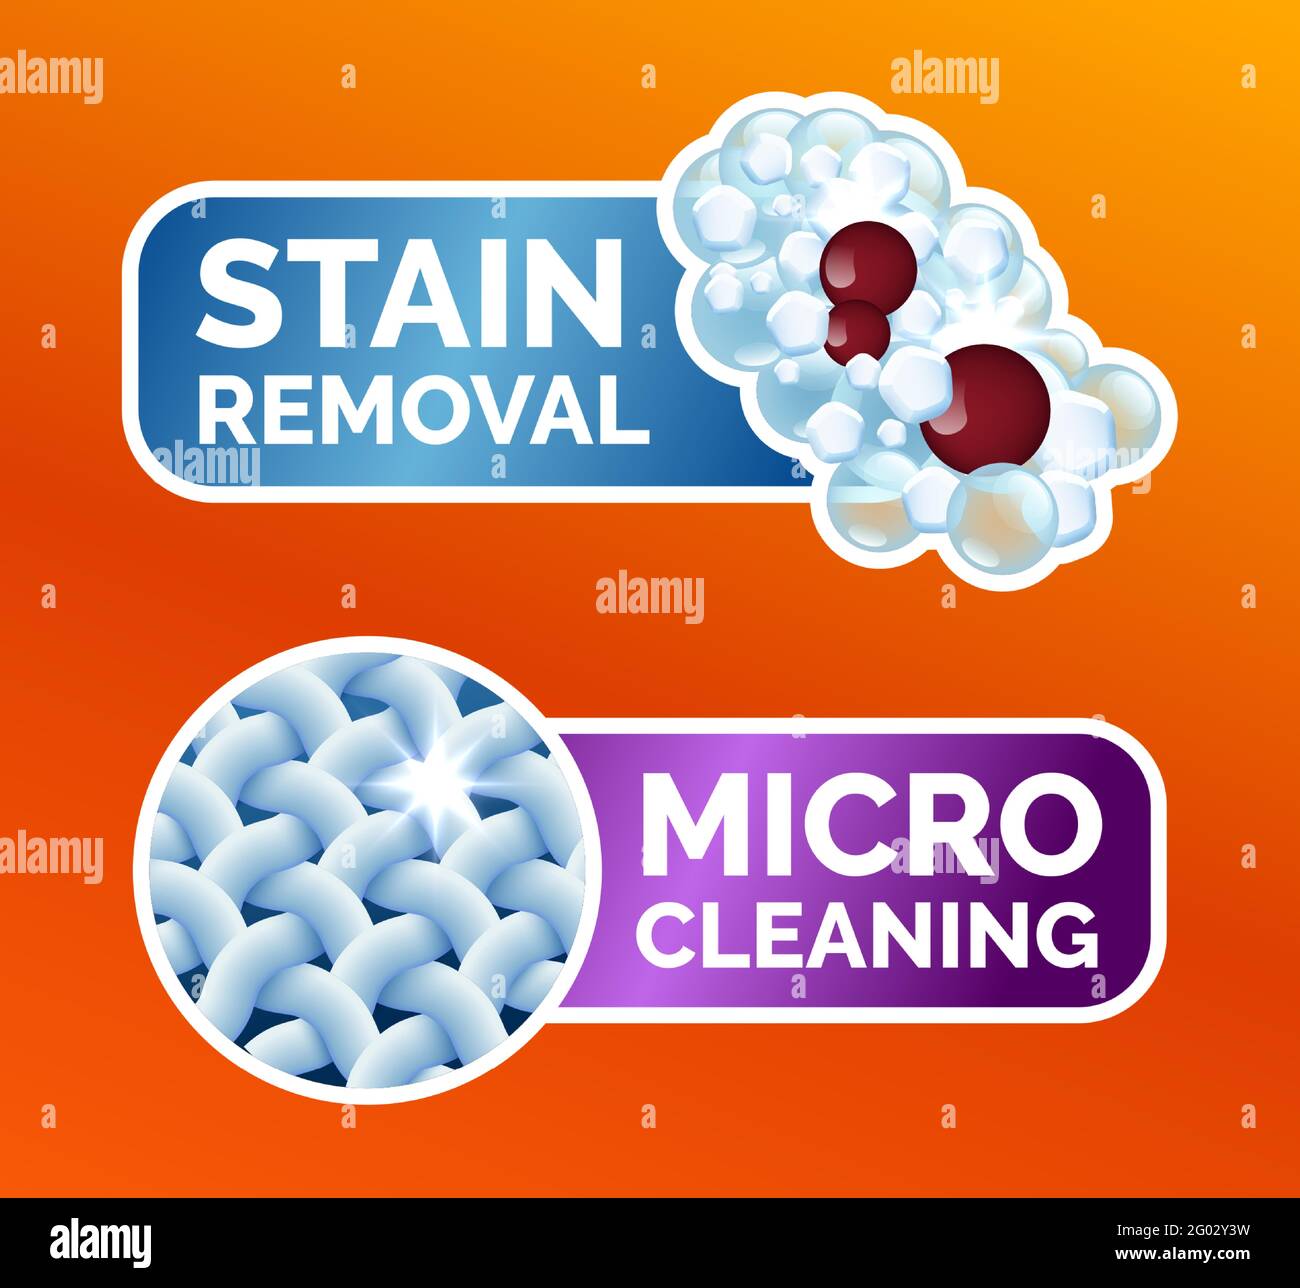 https://c8.alamy.com/comp/2G02Y3W/a-set-of-stickers-for-washing-clothes-stickers-micro-cleaning-stain-removal-best-washing-quality-crystal-white-clean-linen-fibers-isolated-2G02Y3W.jpg